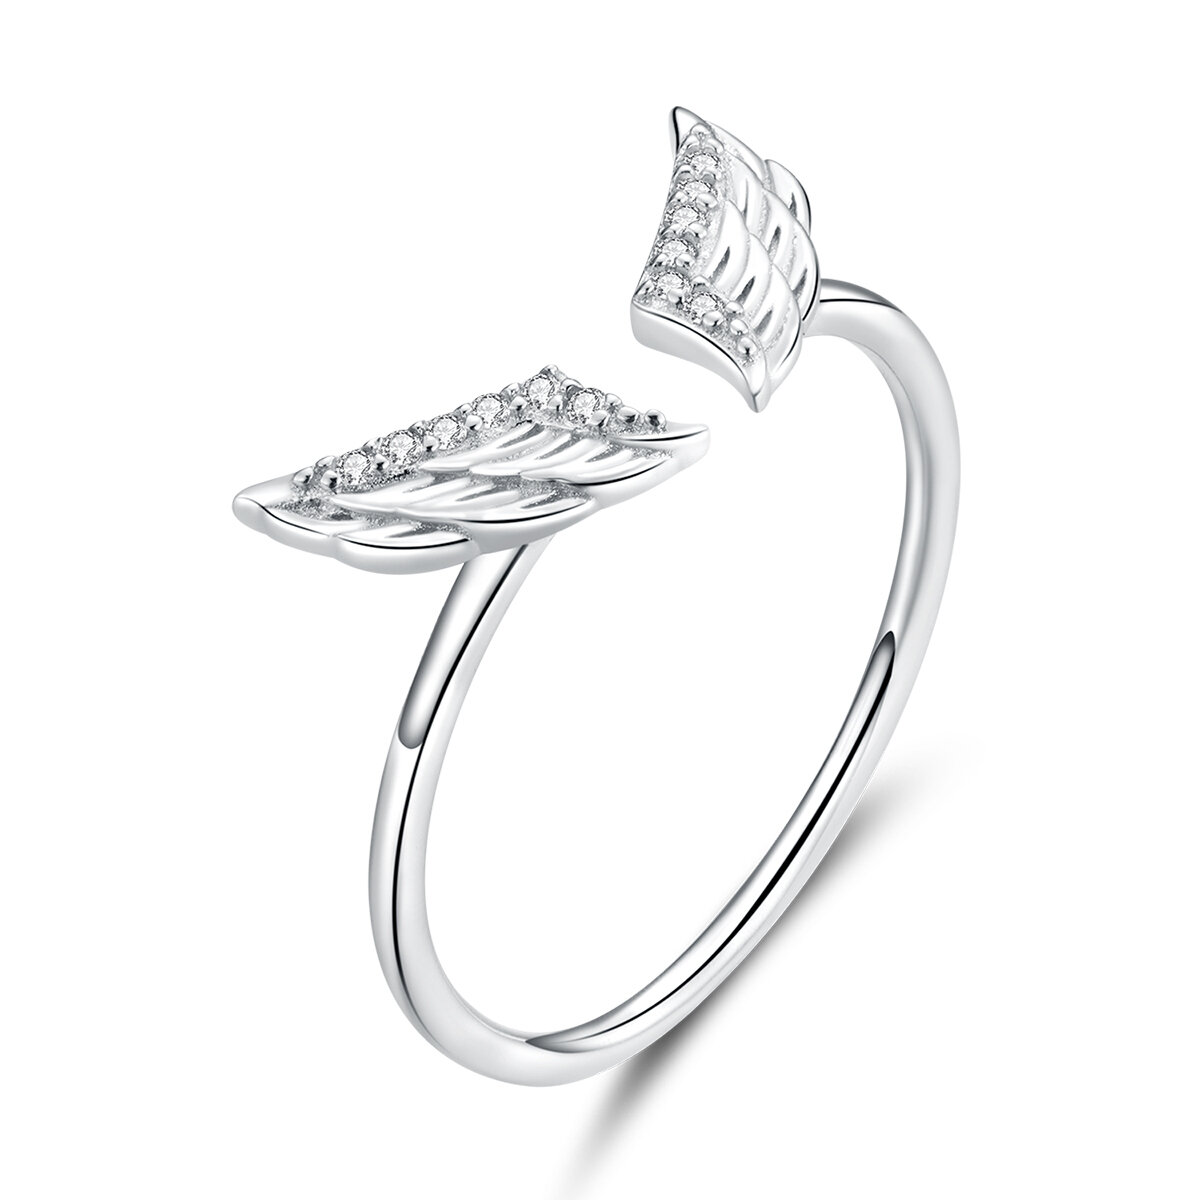 GemKing BSR108 Wings ring S925 Sterling Silver Ring